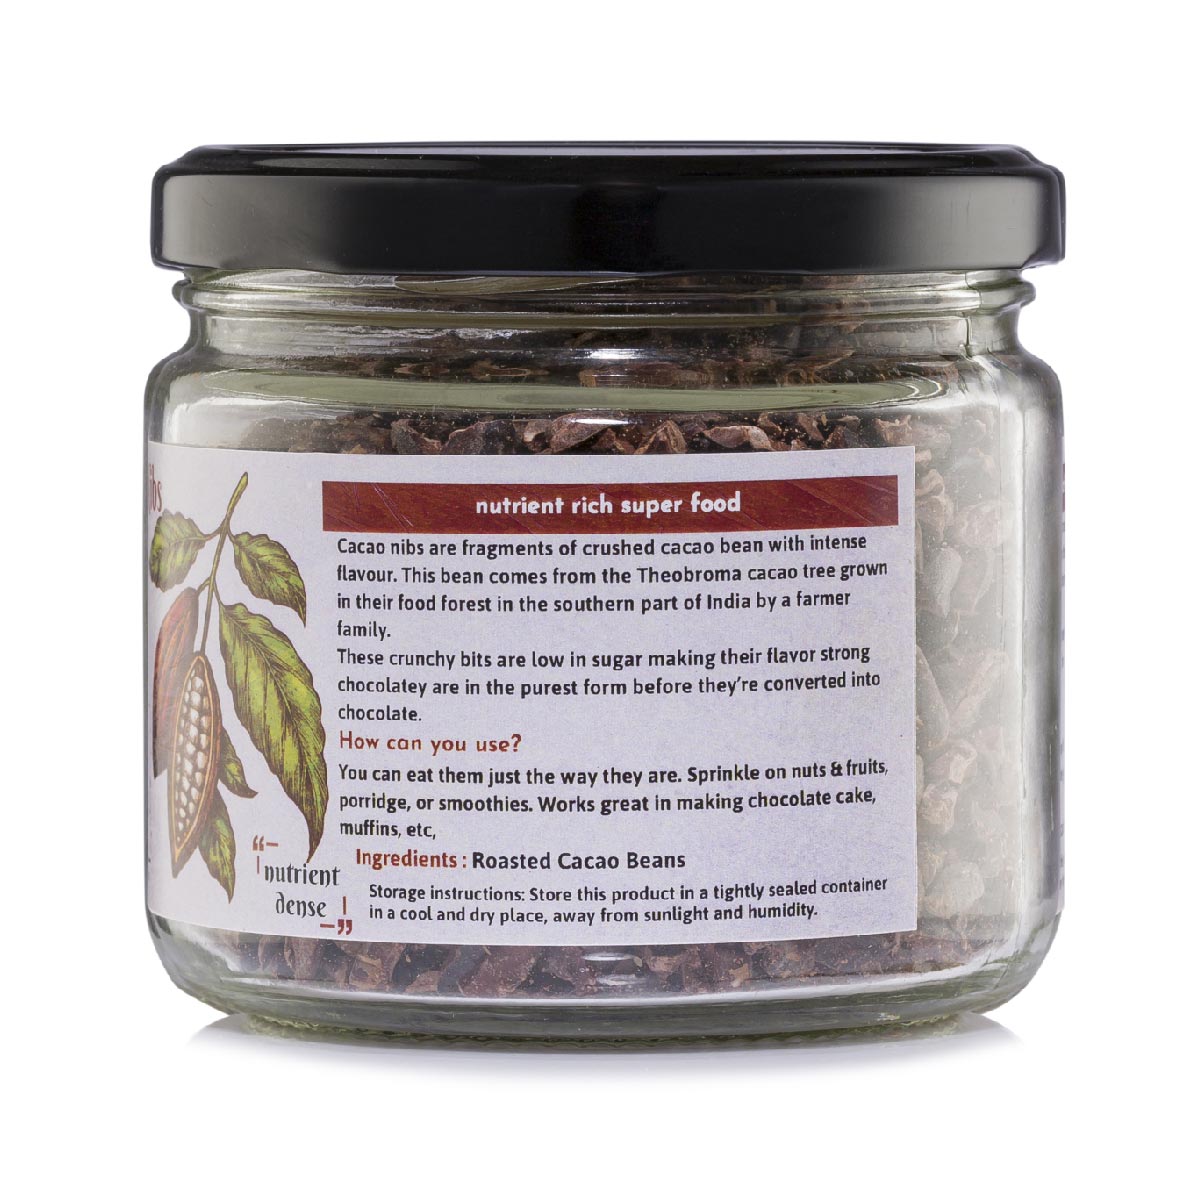 Product: Honey and Spice Cacao Nibs